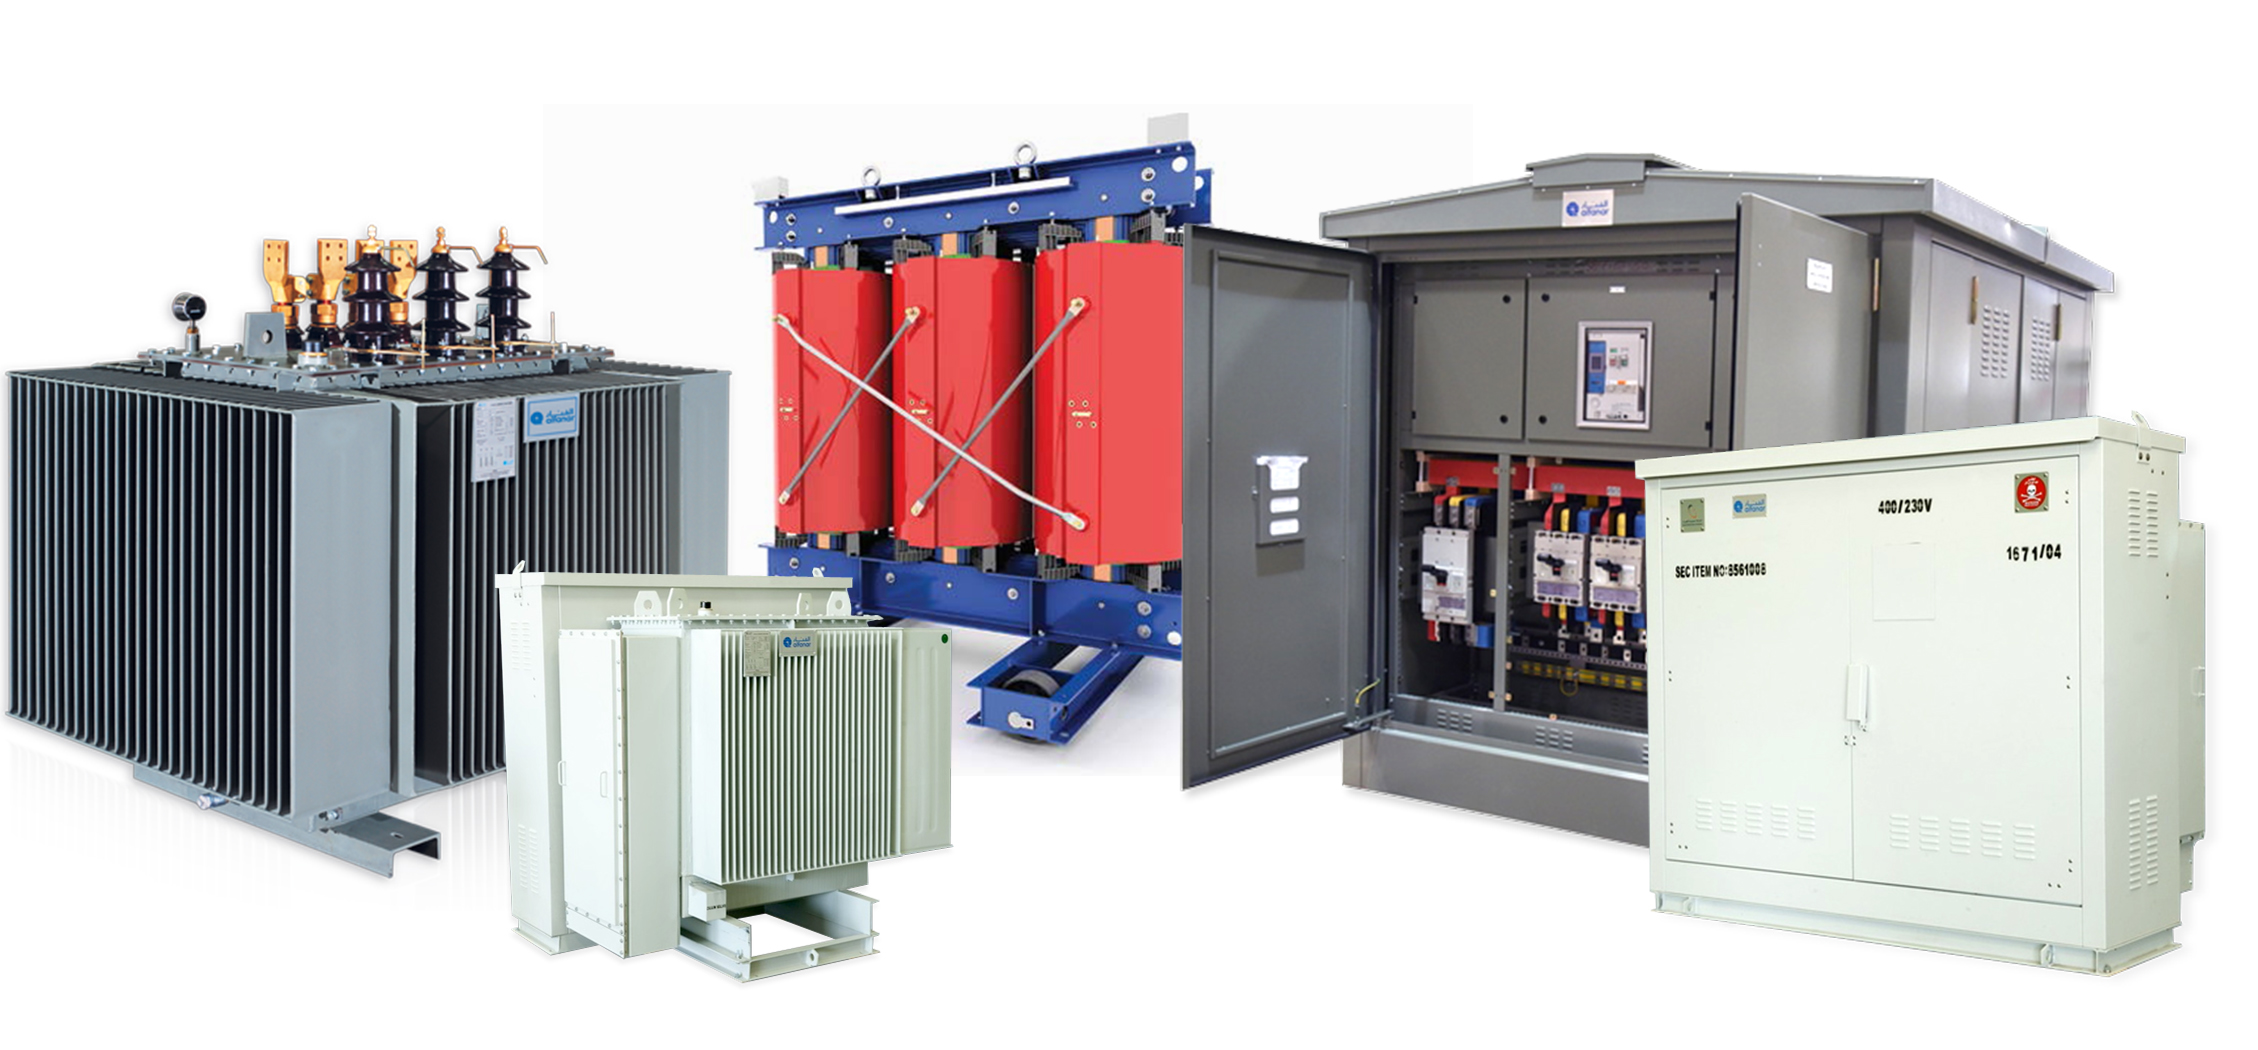 TRANSFORMERS & PACKAGE SUBSTATIONS